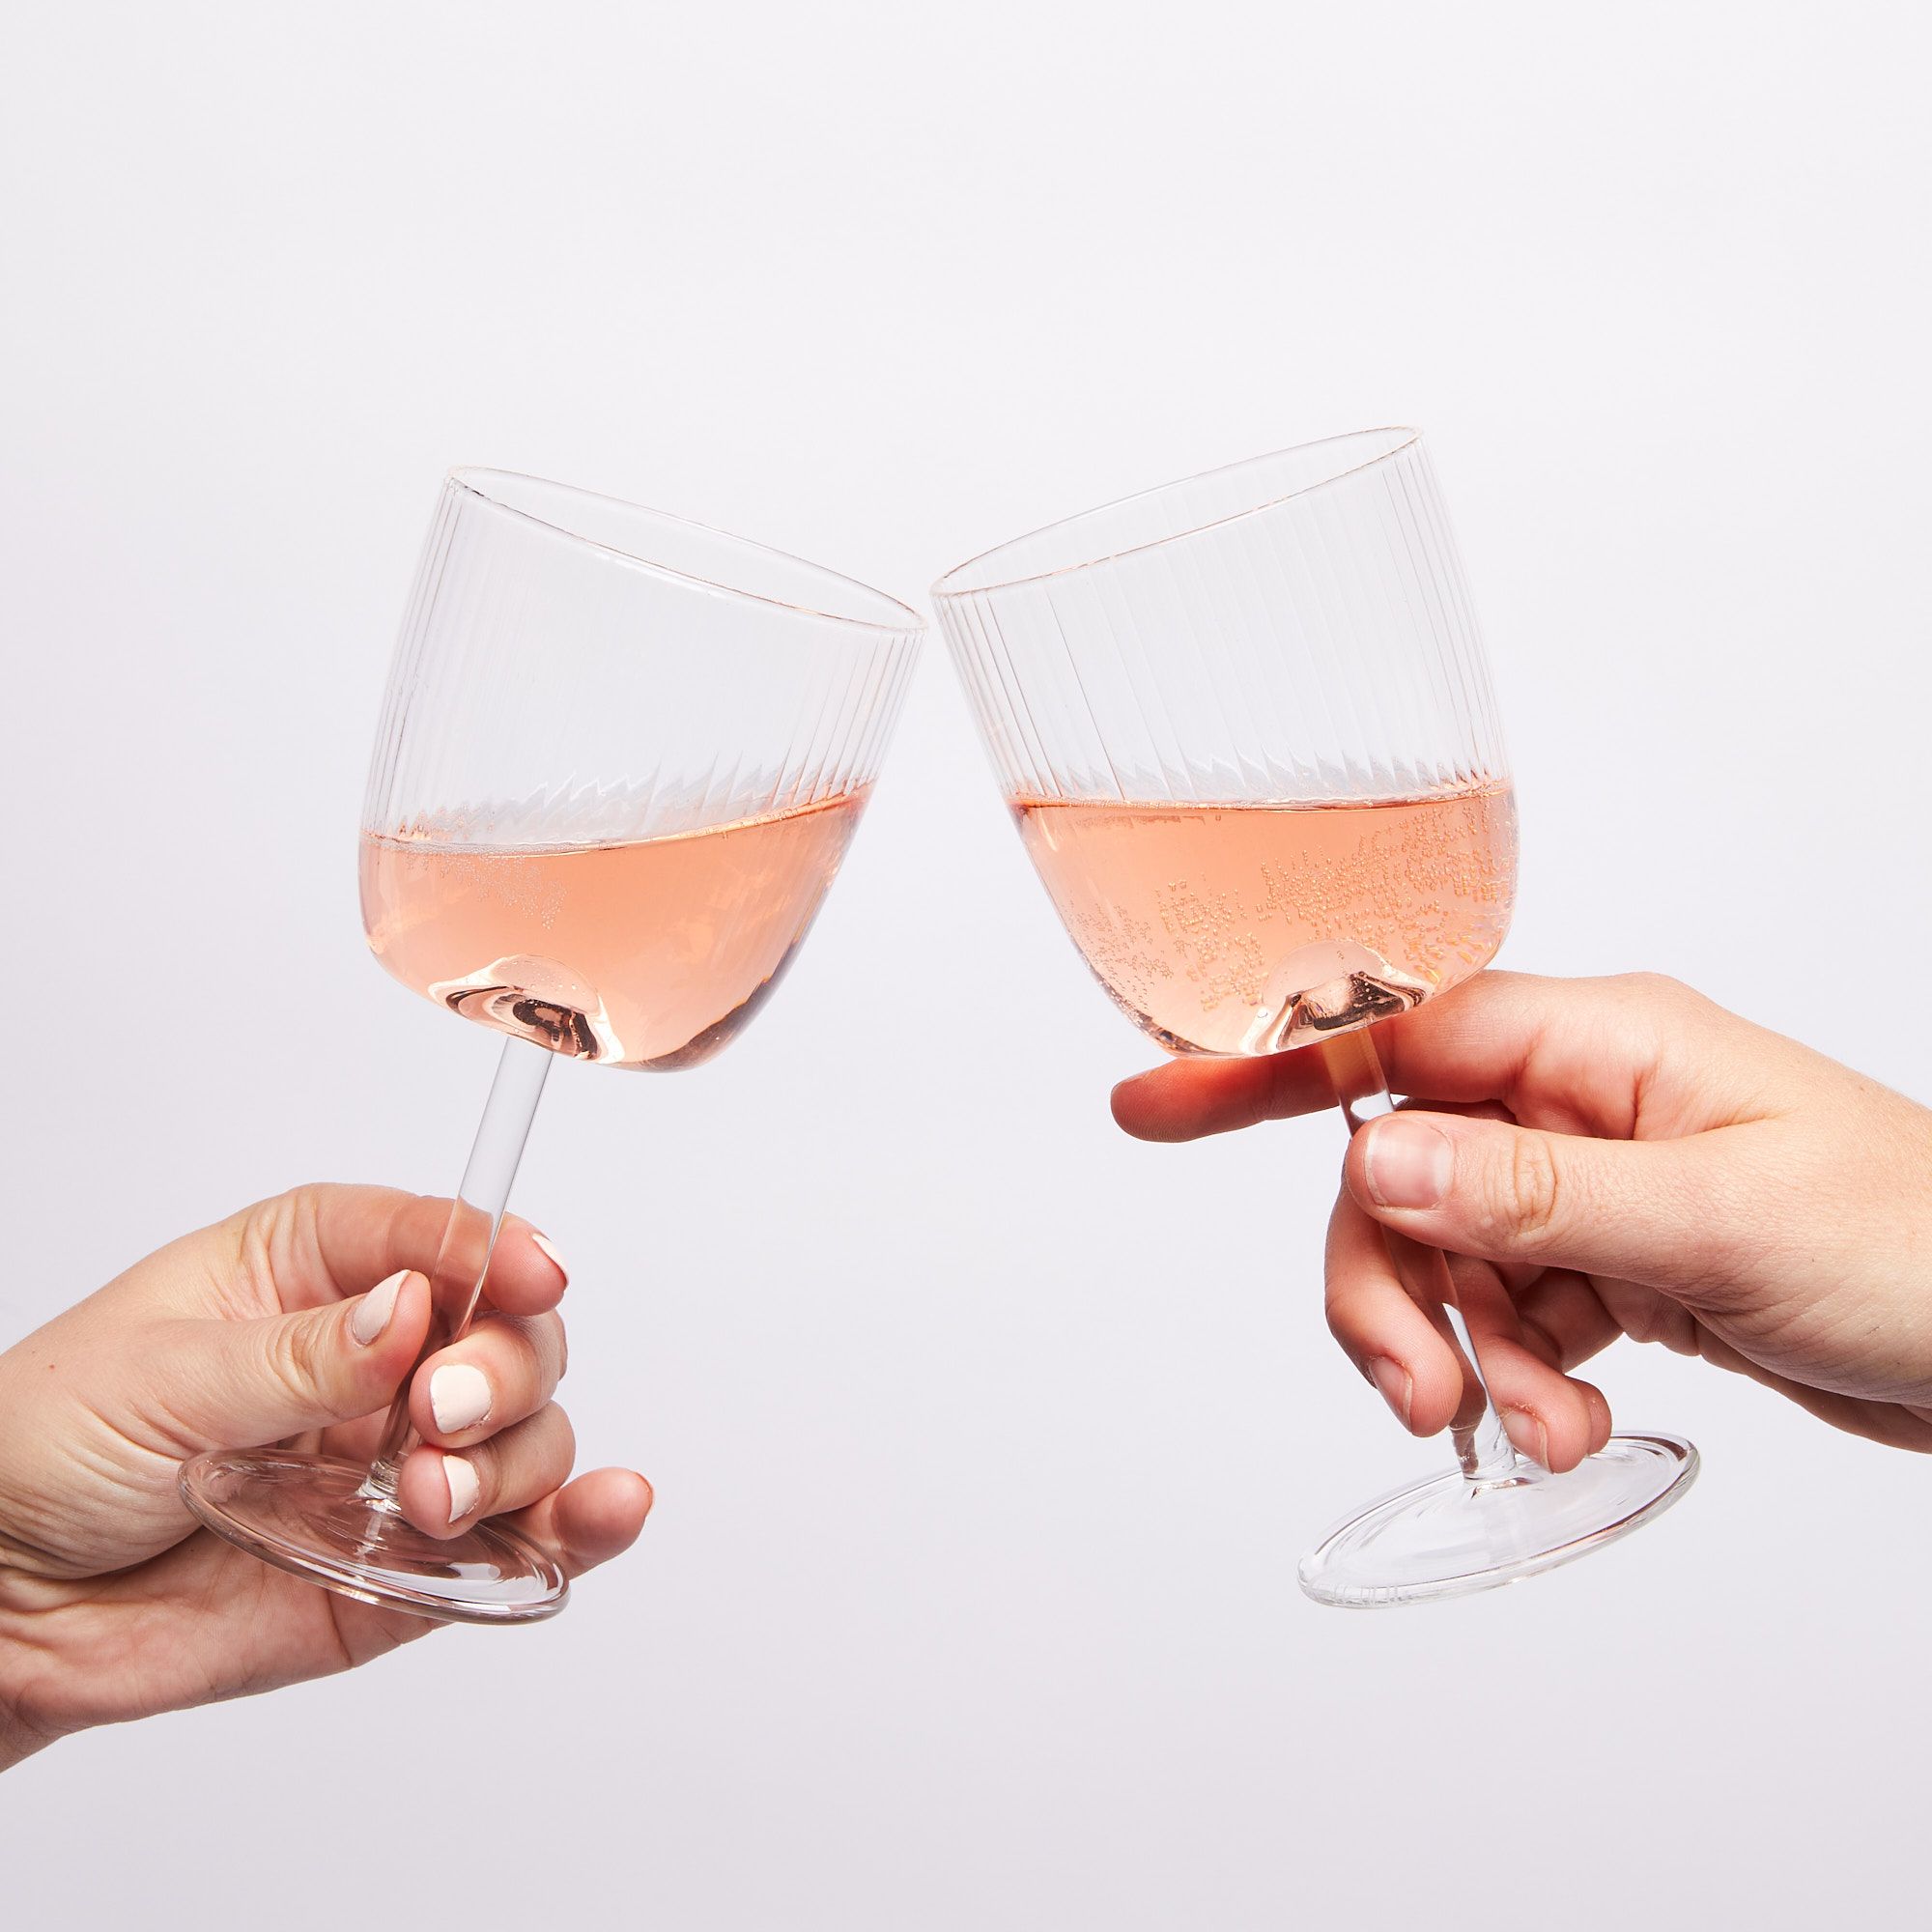 Hands holding two wine glasses with pink wine half full cheersing